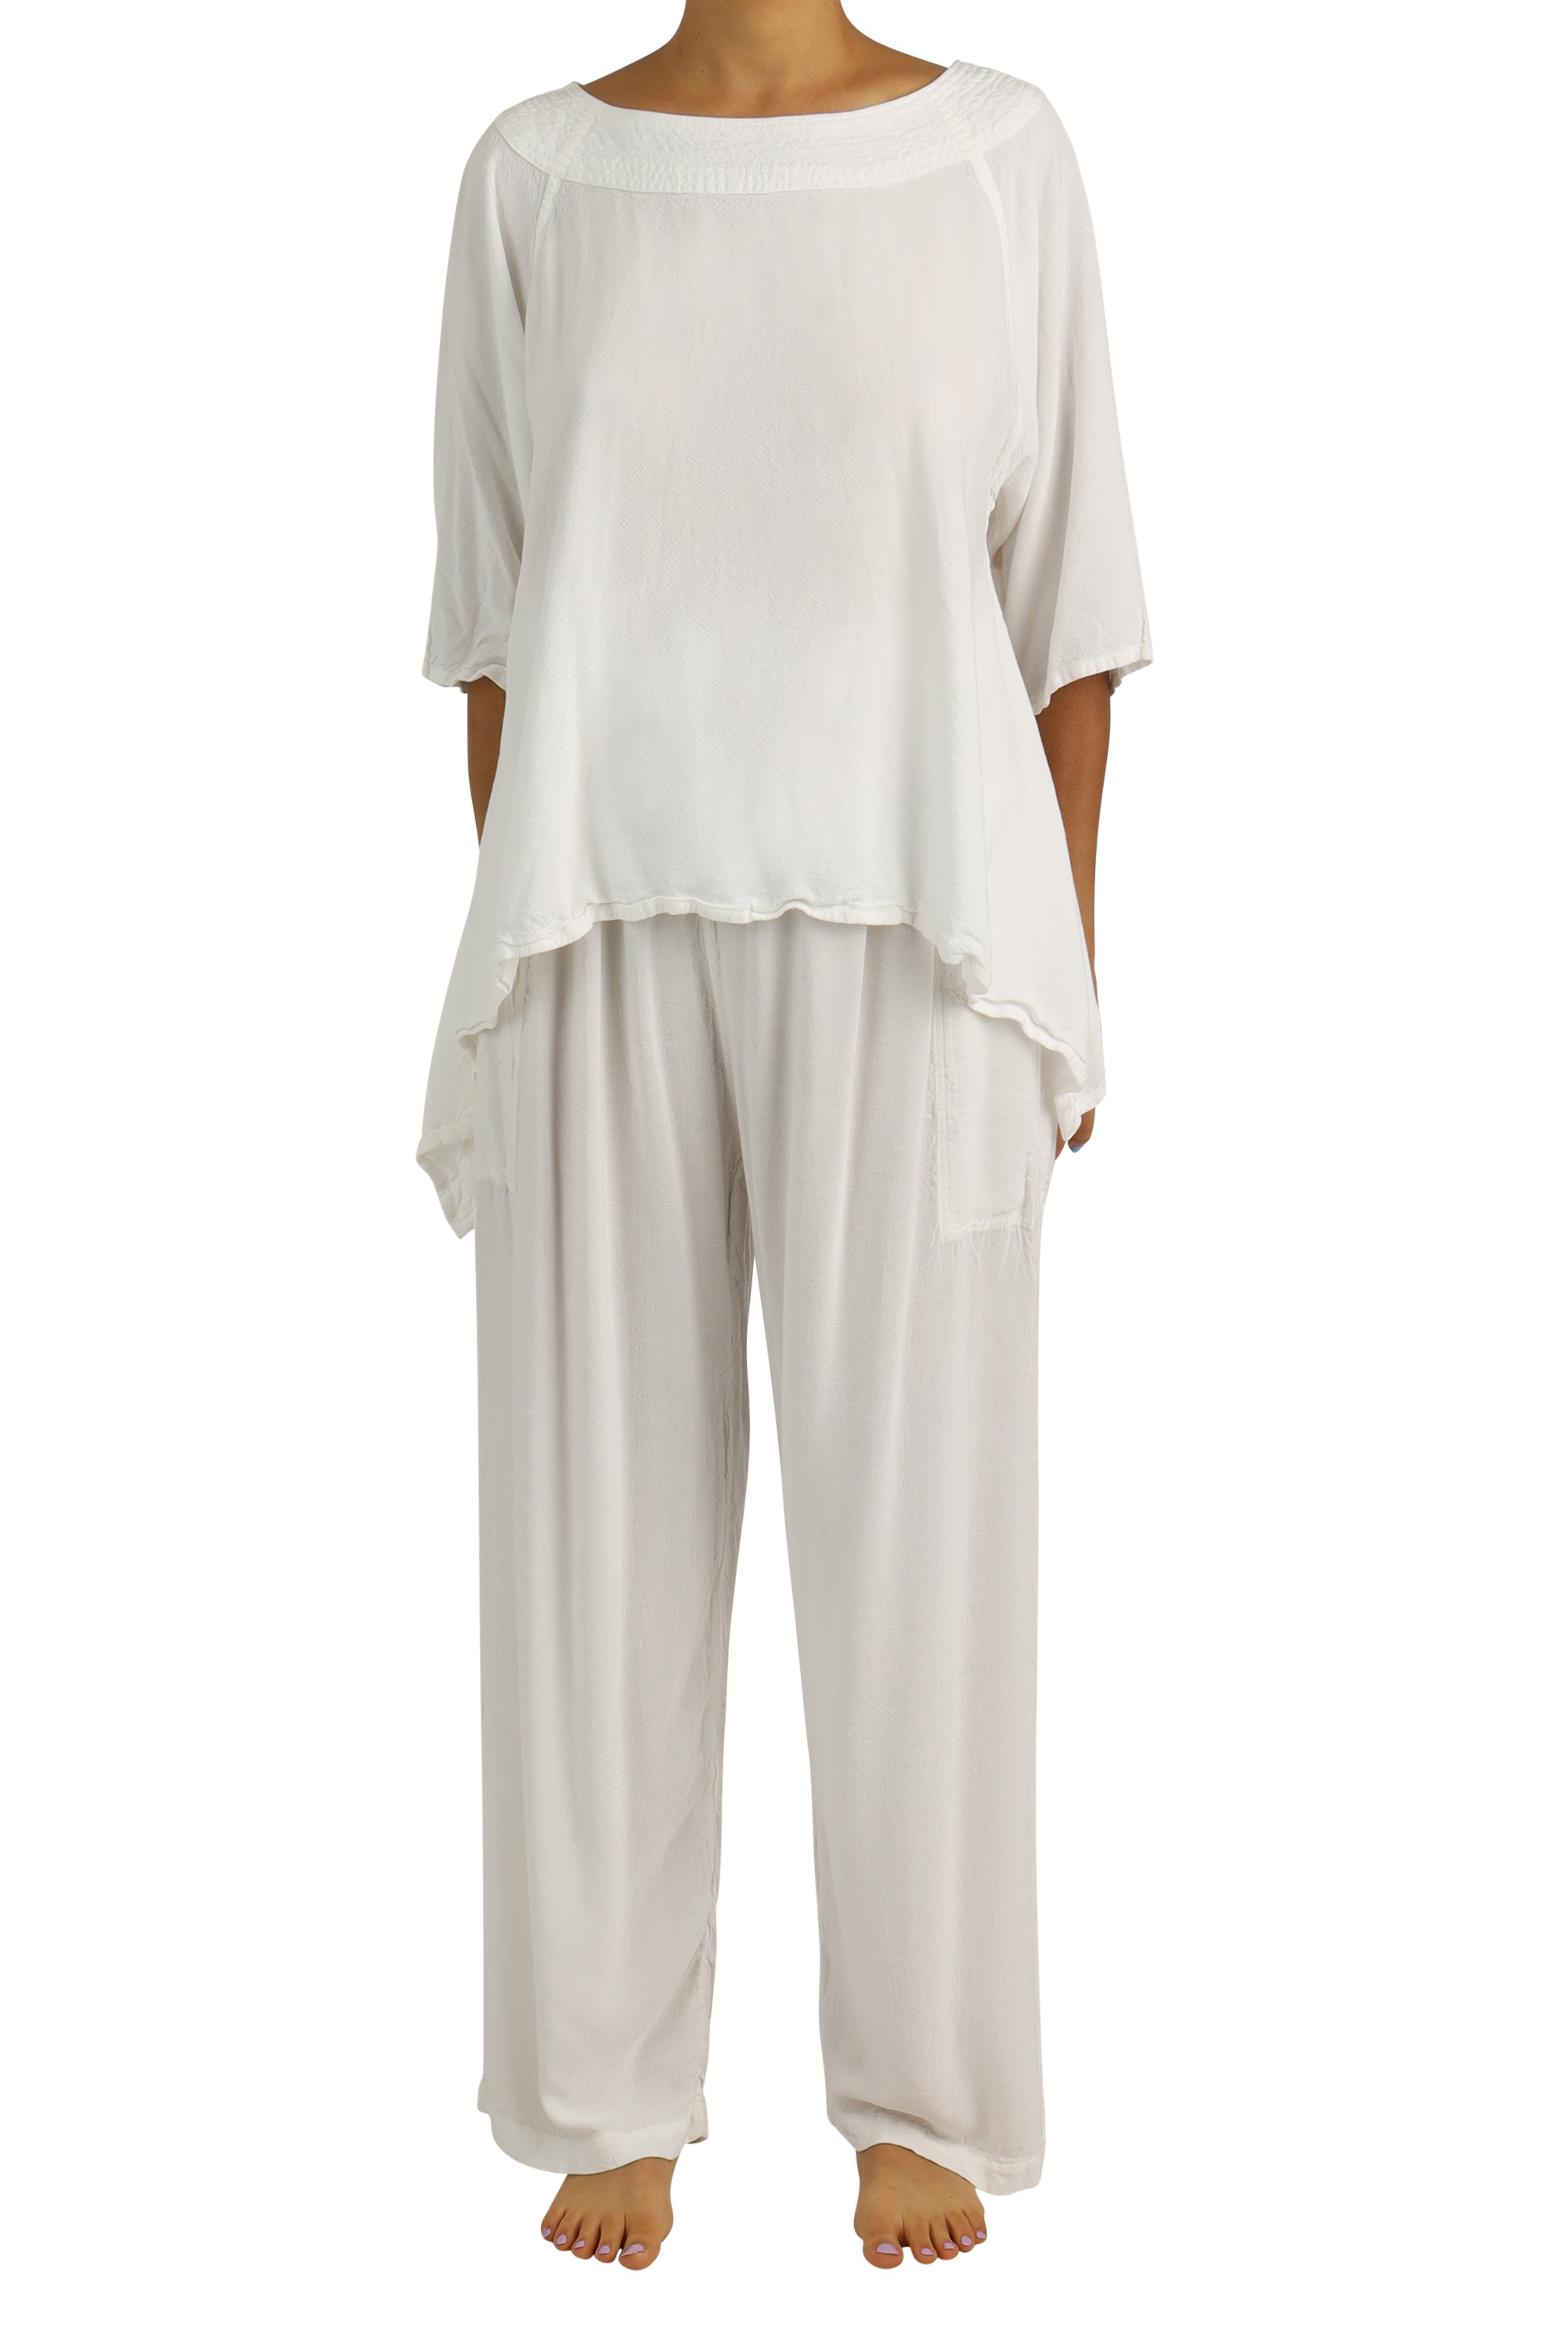 Grecian Eclipse Top x Gypsy Flare Pant